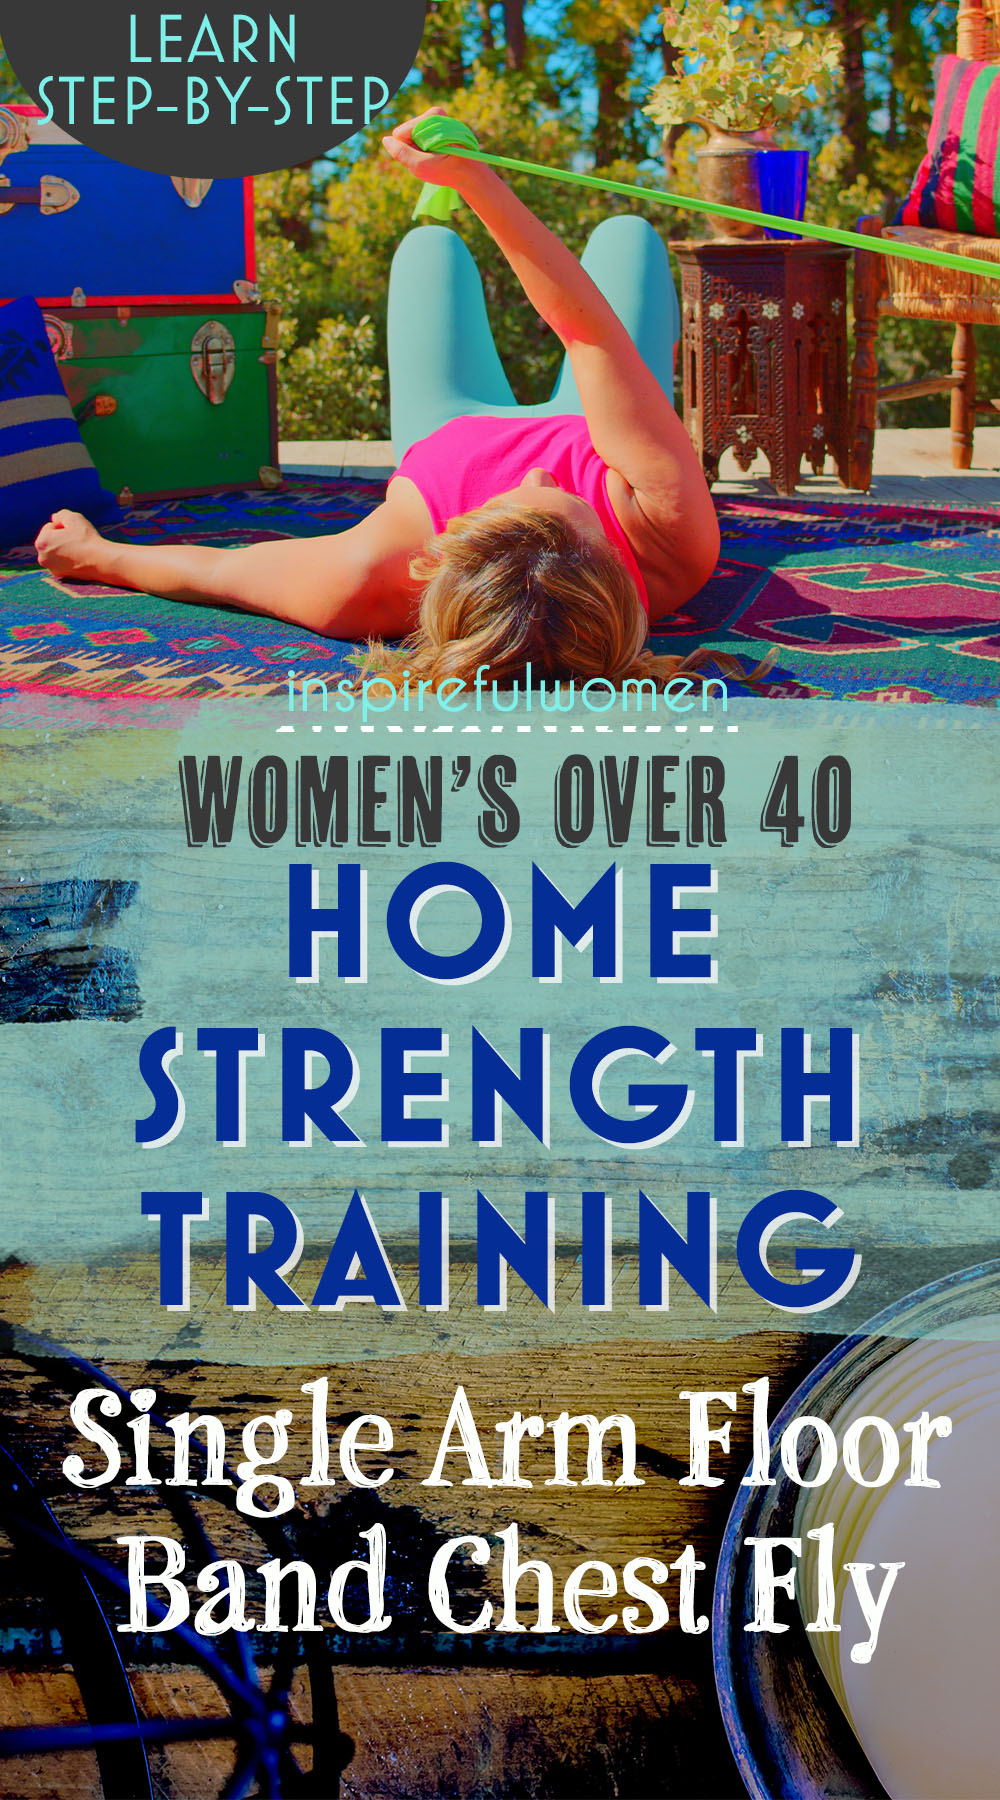 single-arm-floor-resistance-band-chest-fly-exercise-women-over-40